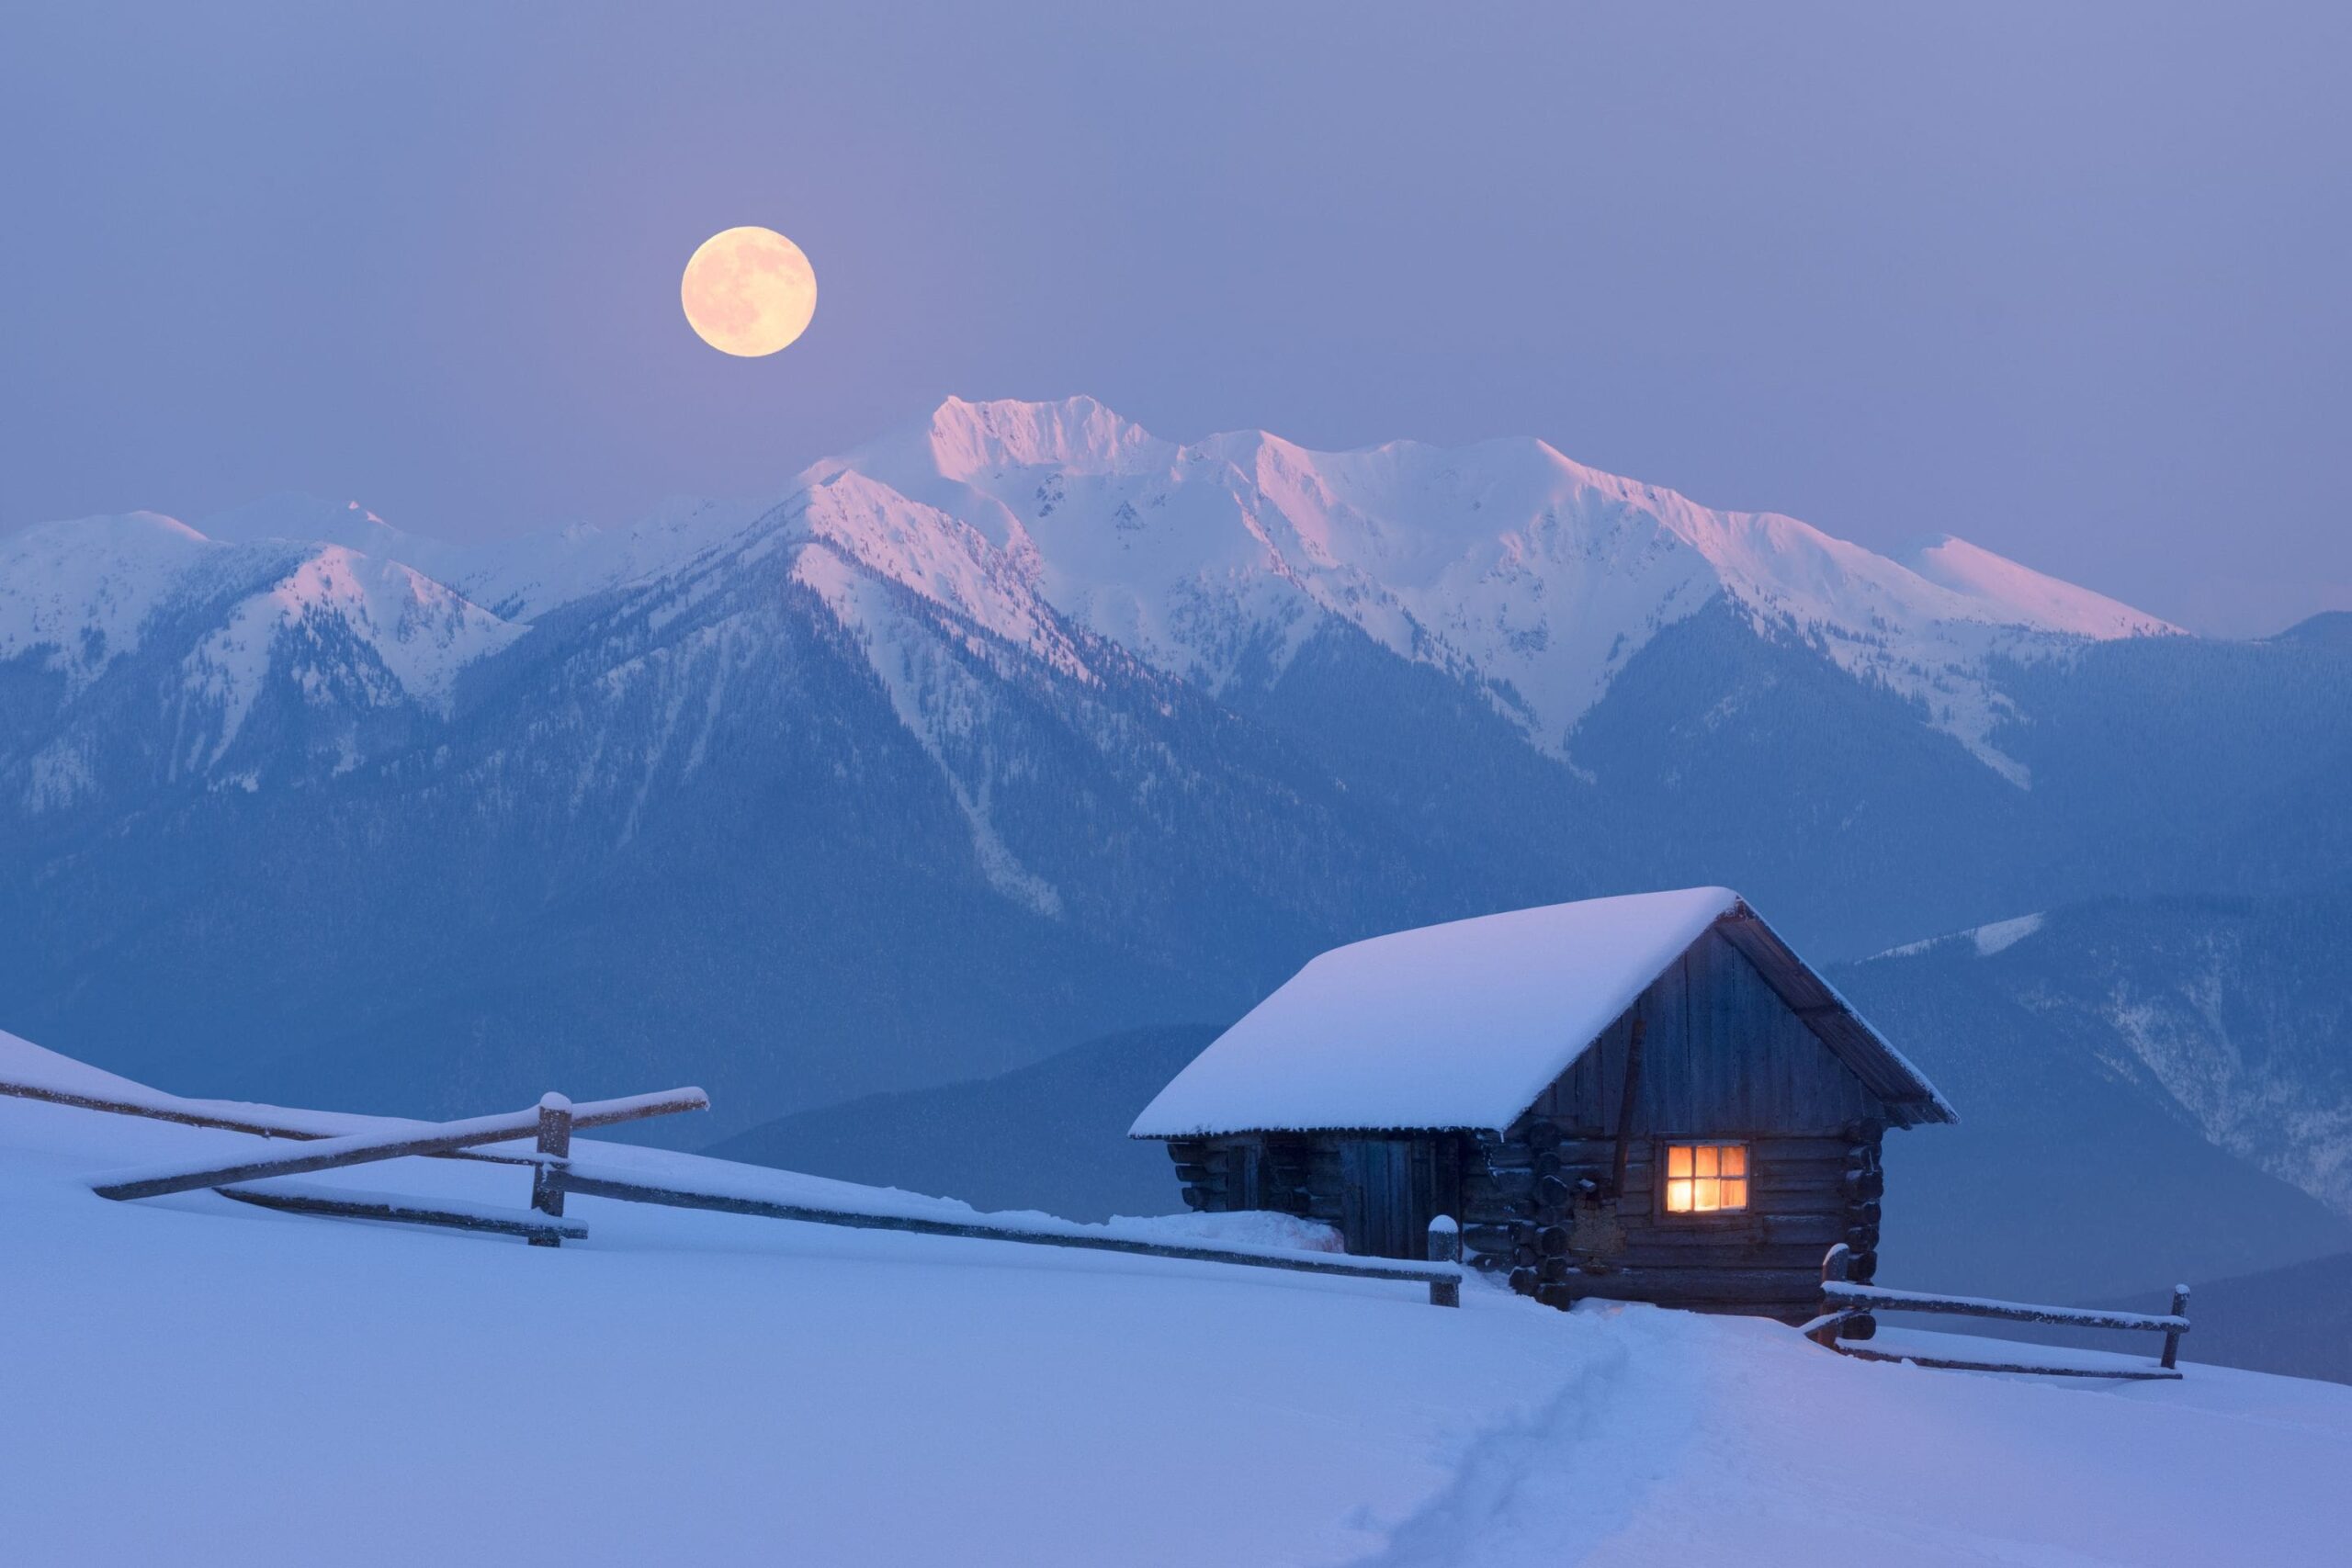 small cabin covered in snow with snowy mountains and a full moon in the background